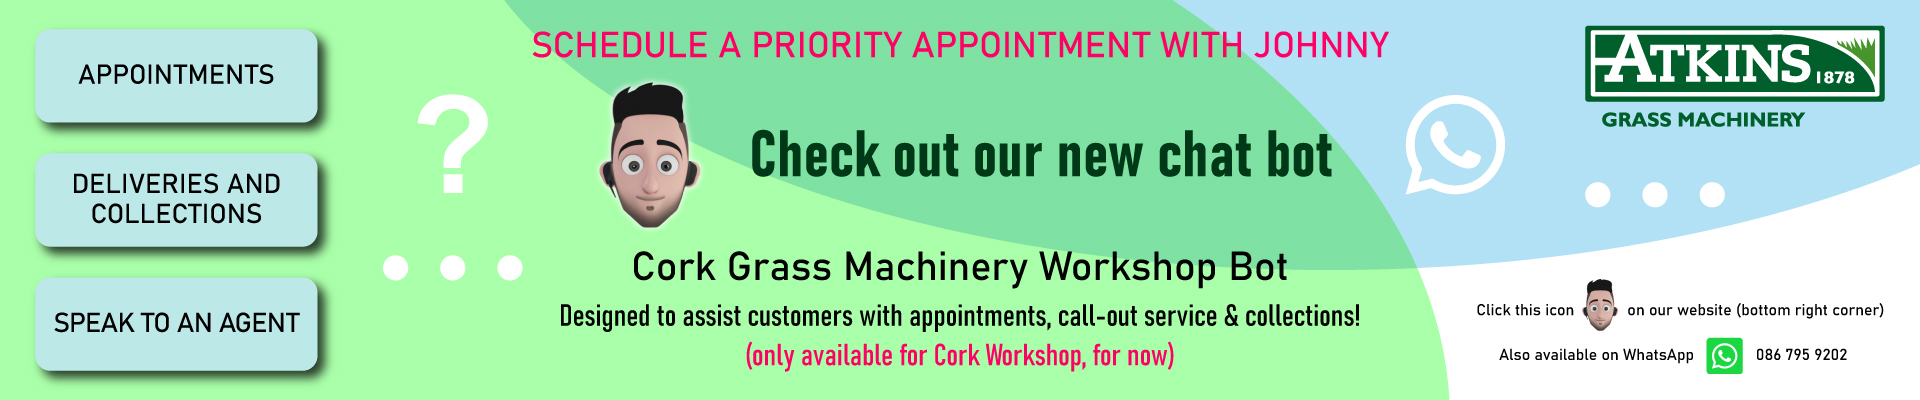 Grass Machinery Booking System